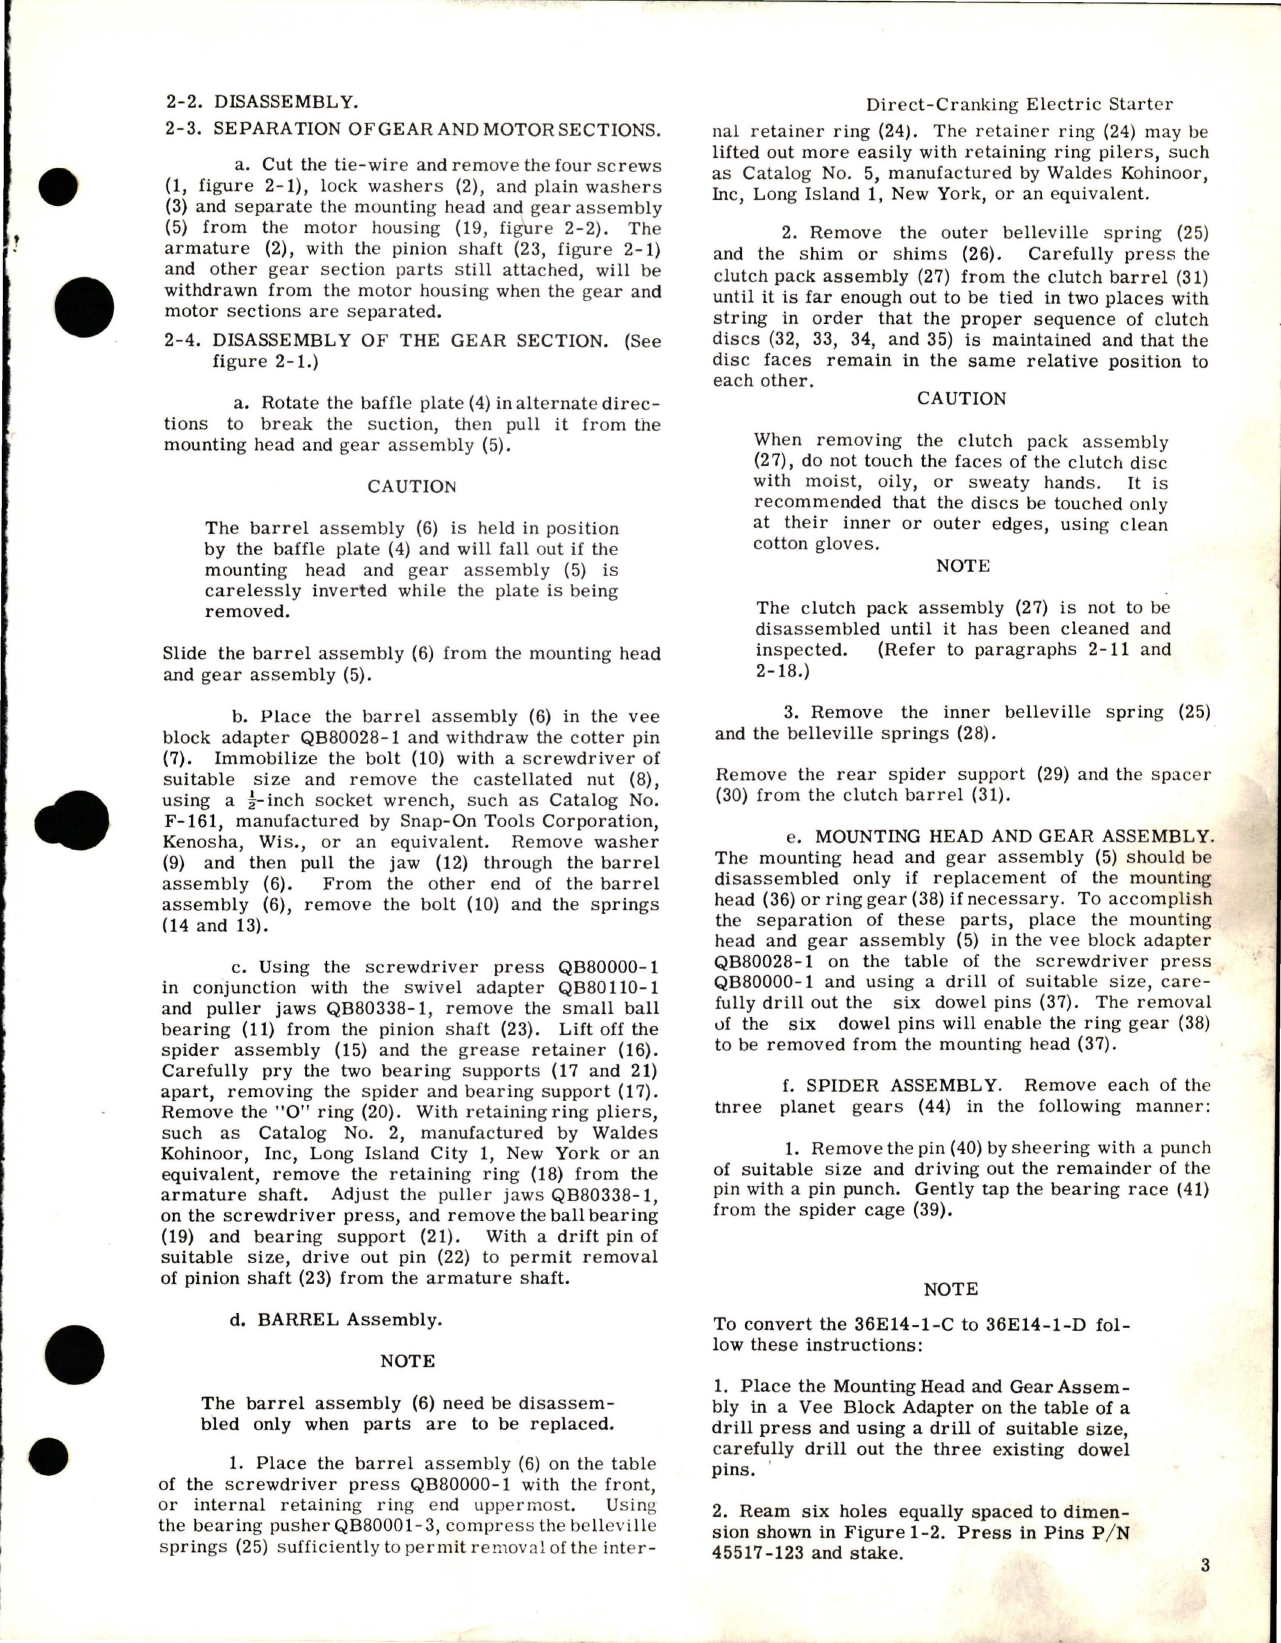 Sample page 7 from AirCorps Library document: Overhaul Instructions for Direct-Cranking Electric Starter - Type 36E14-1-D